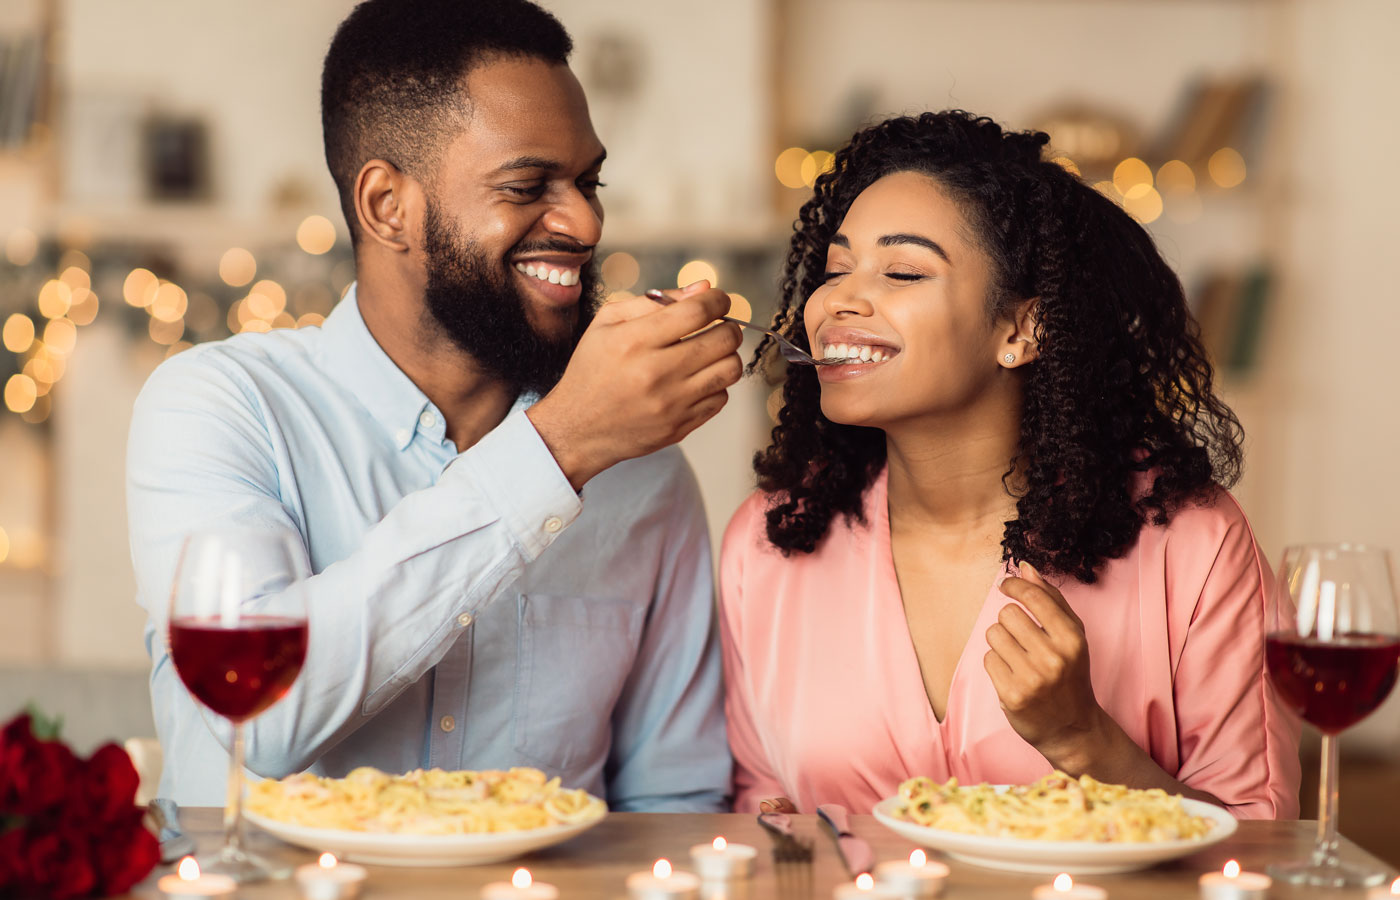 Smiling man feeding his date pasta during romantic dinner at home